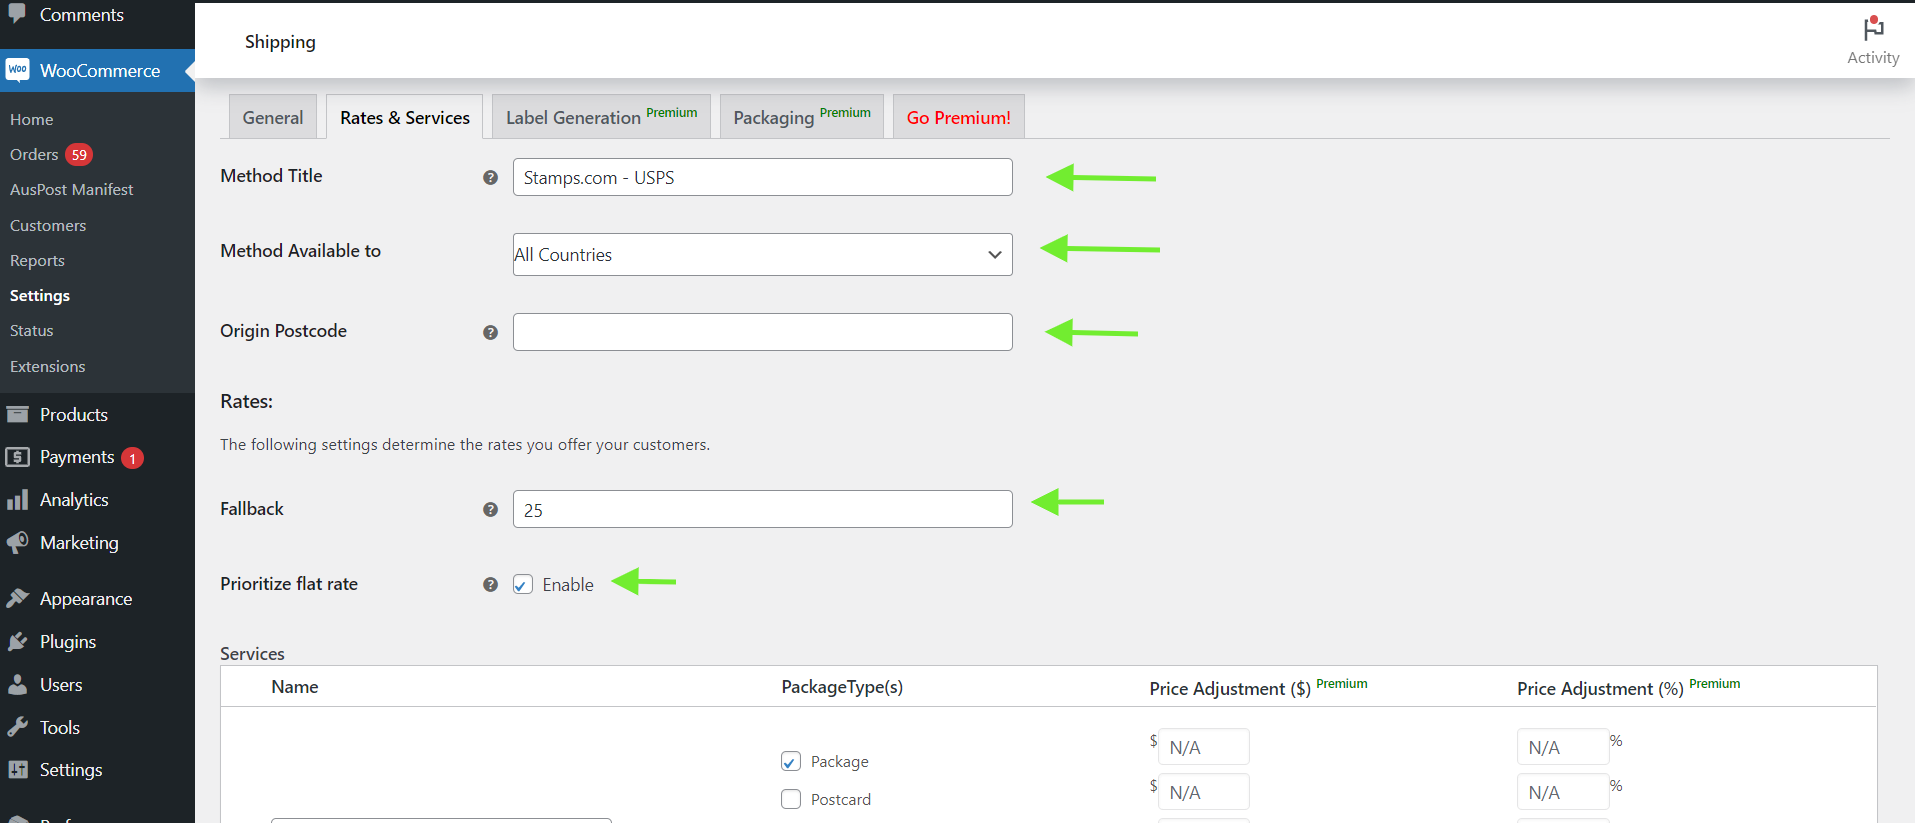 Rates & Services settings in the plugin dashboard